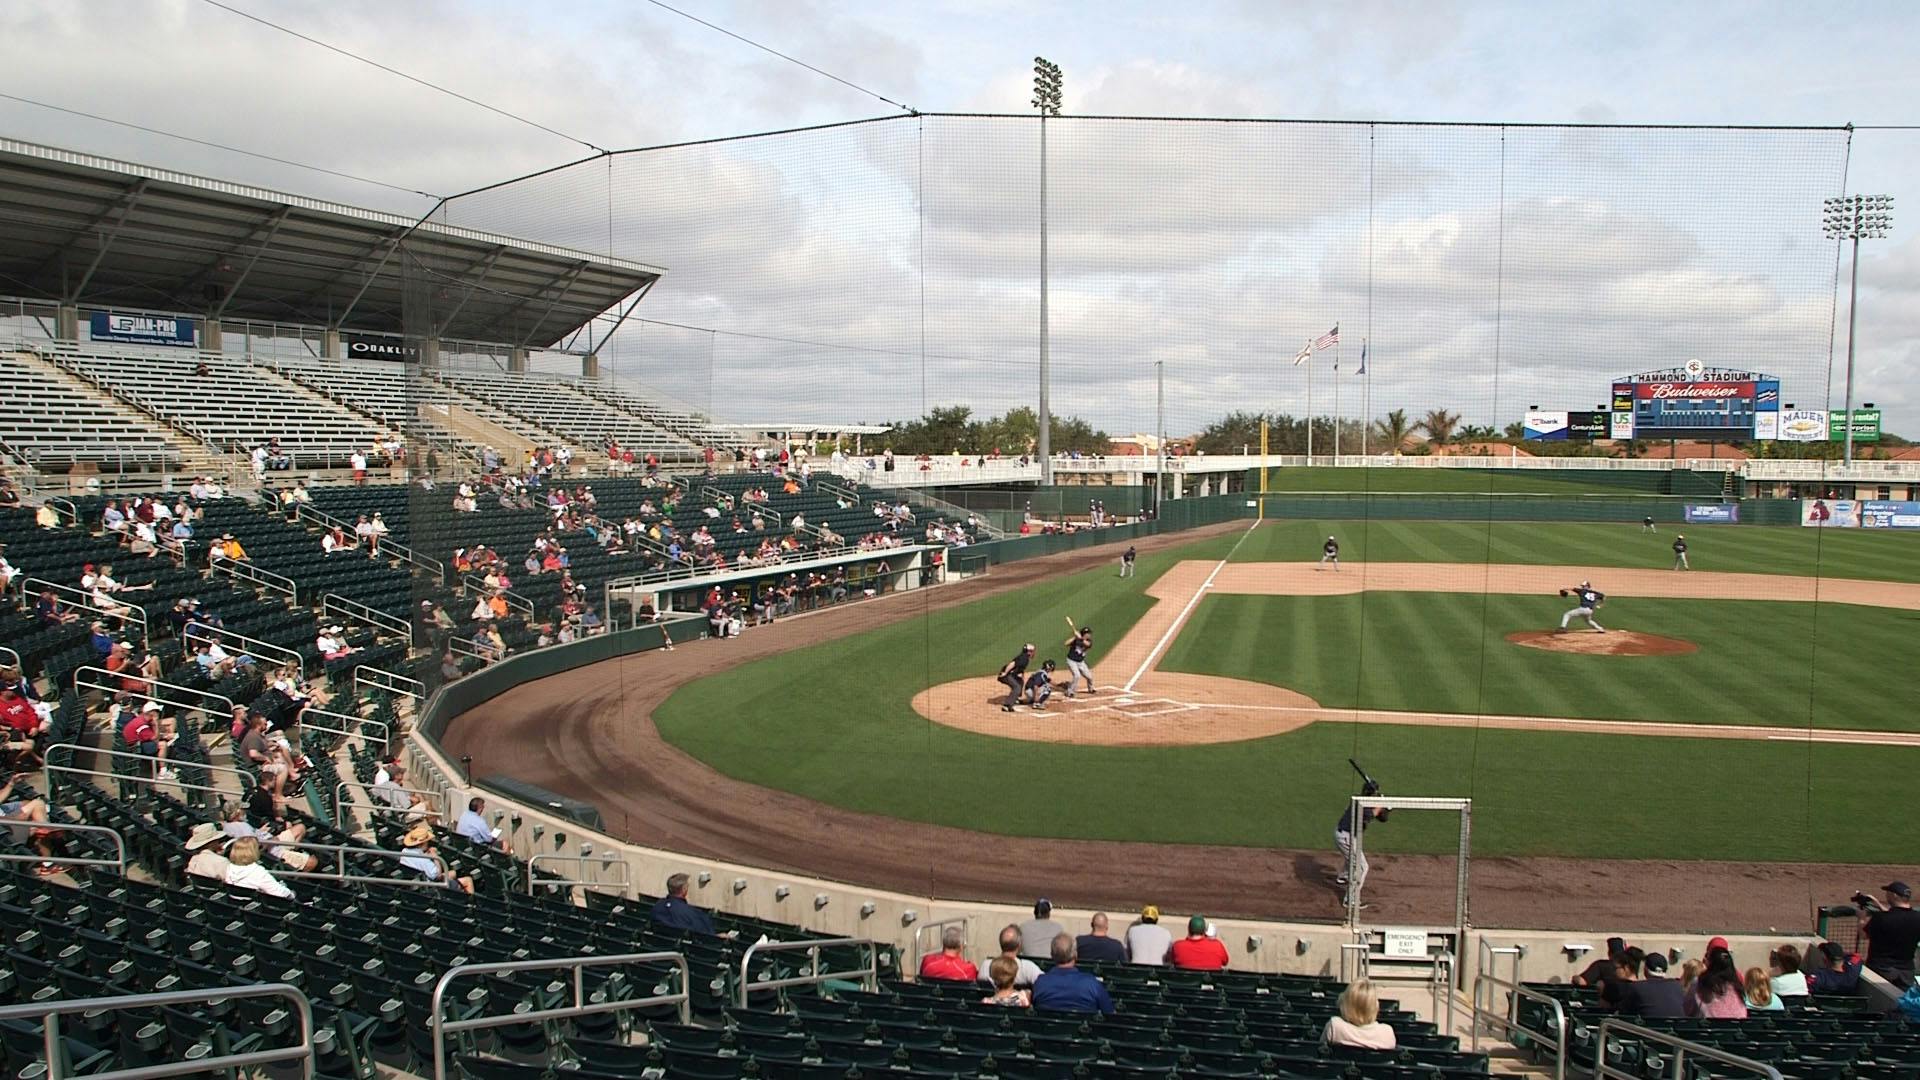 LaVelle E. Neal III and Phil Miller review the Twins' intrasquad outing and preview what to look for in spring training games.